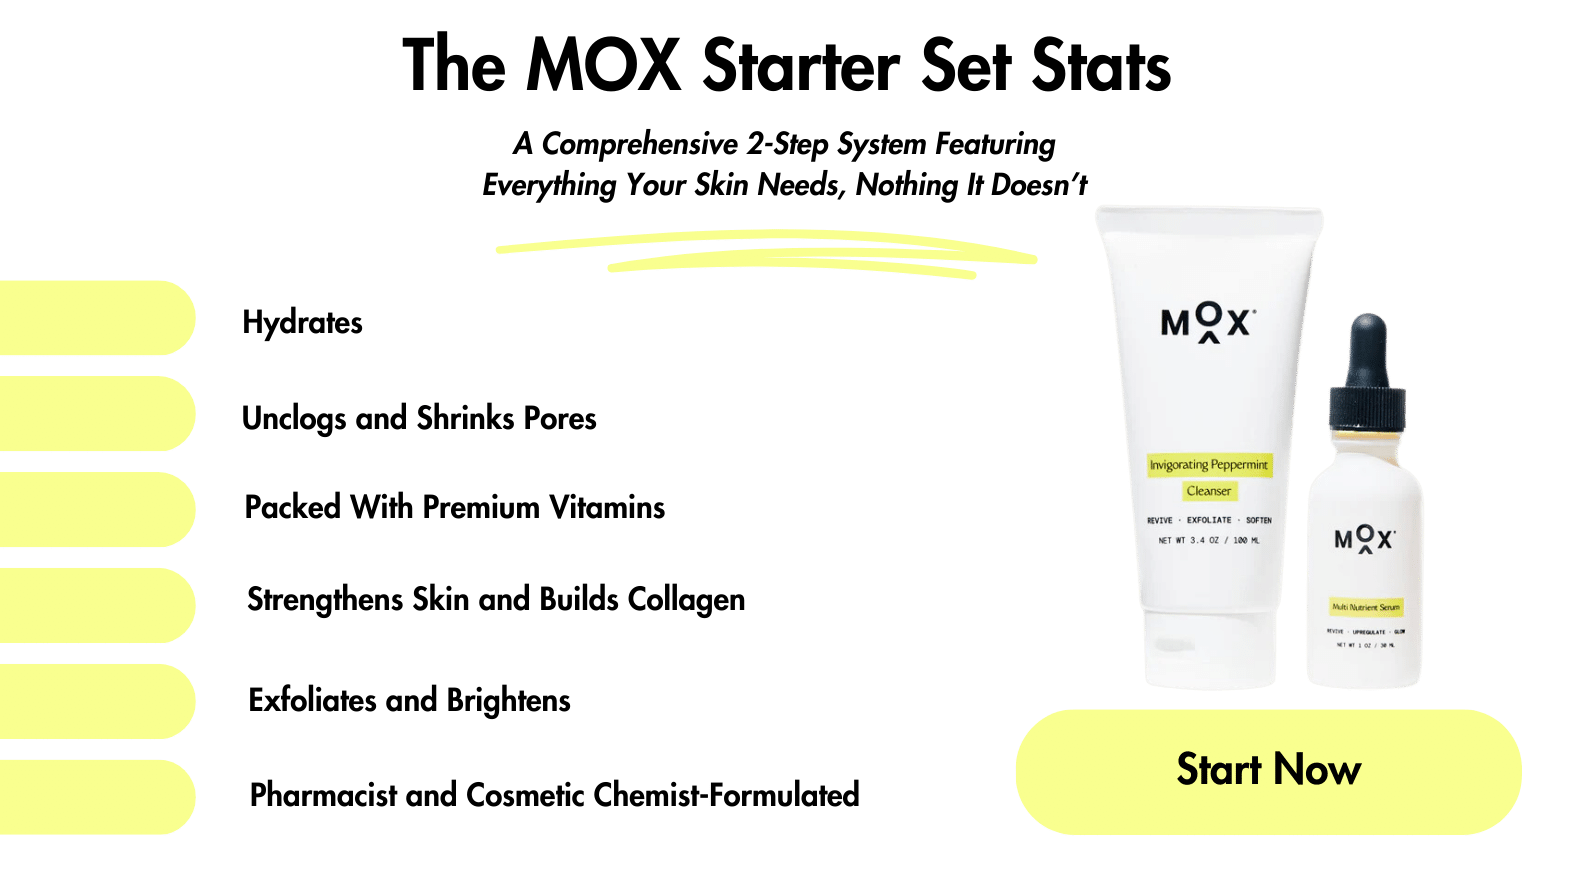 Is it good to wash your face with cold water? The benefits of using the MOX Starter Set with warm water.